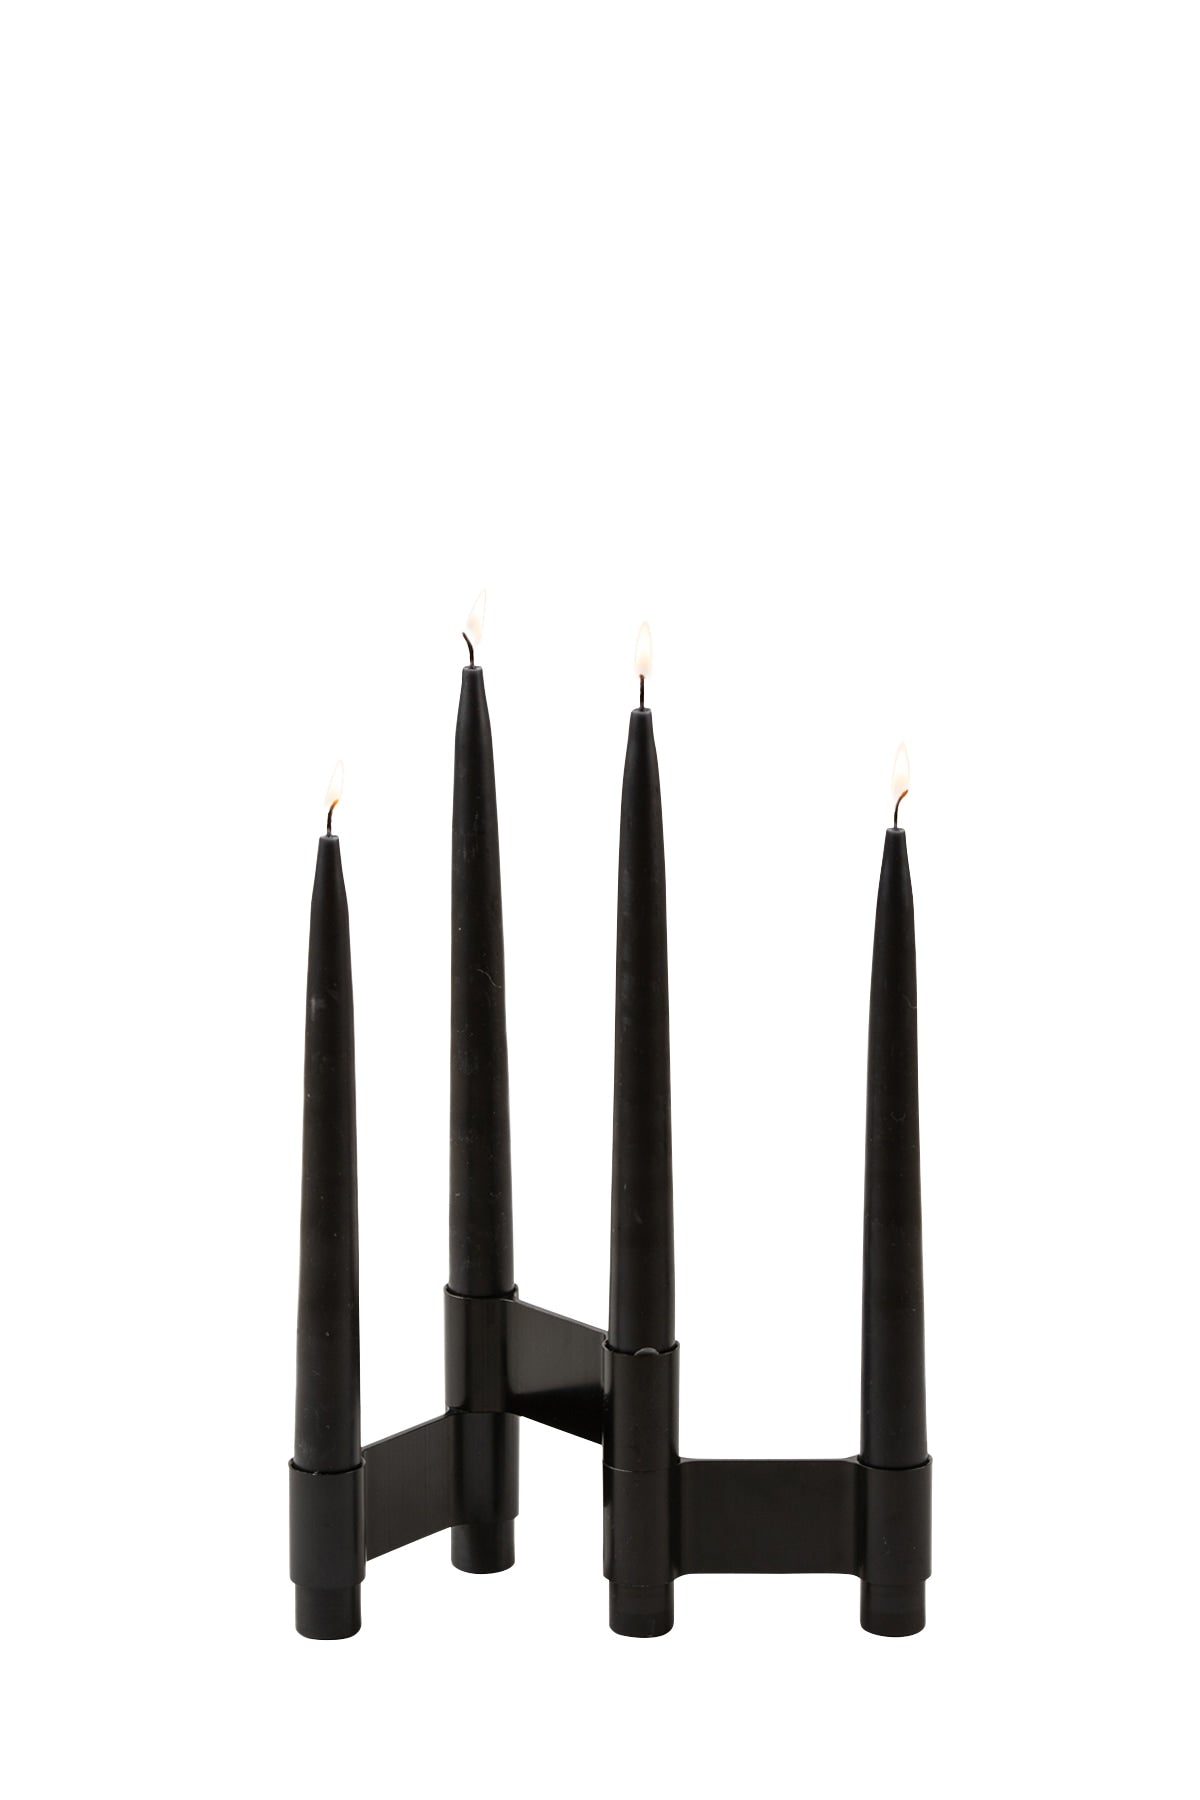 LINK, CANDLE HOLDER, BLACK ANODIZED